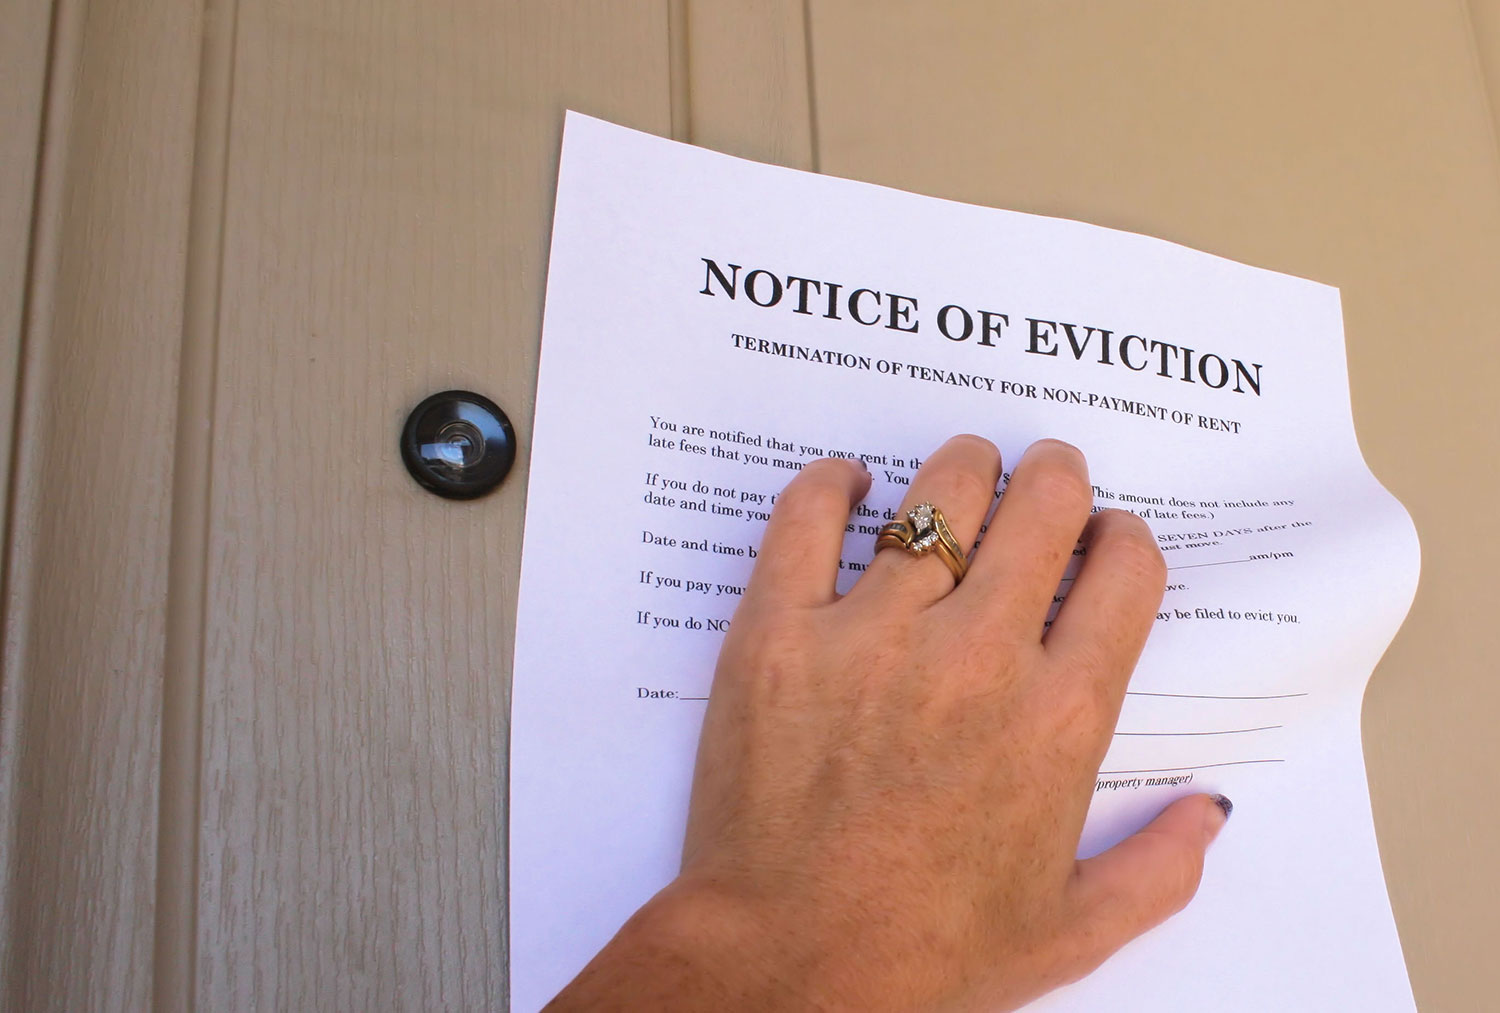 How to evict a tenant without a rental agreement or lease? New Jersey